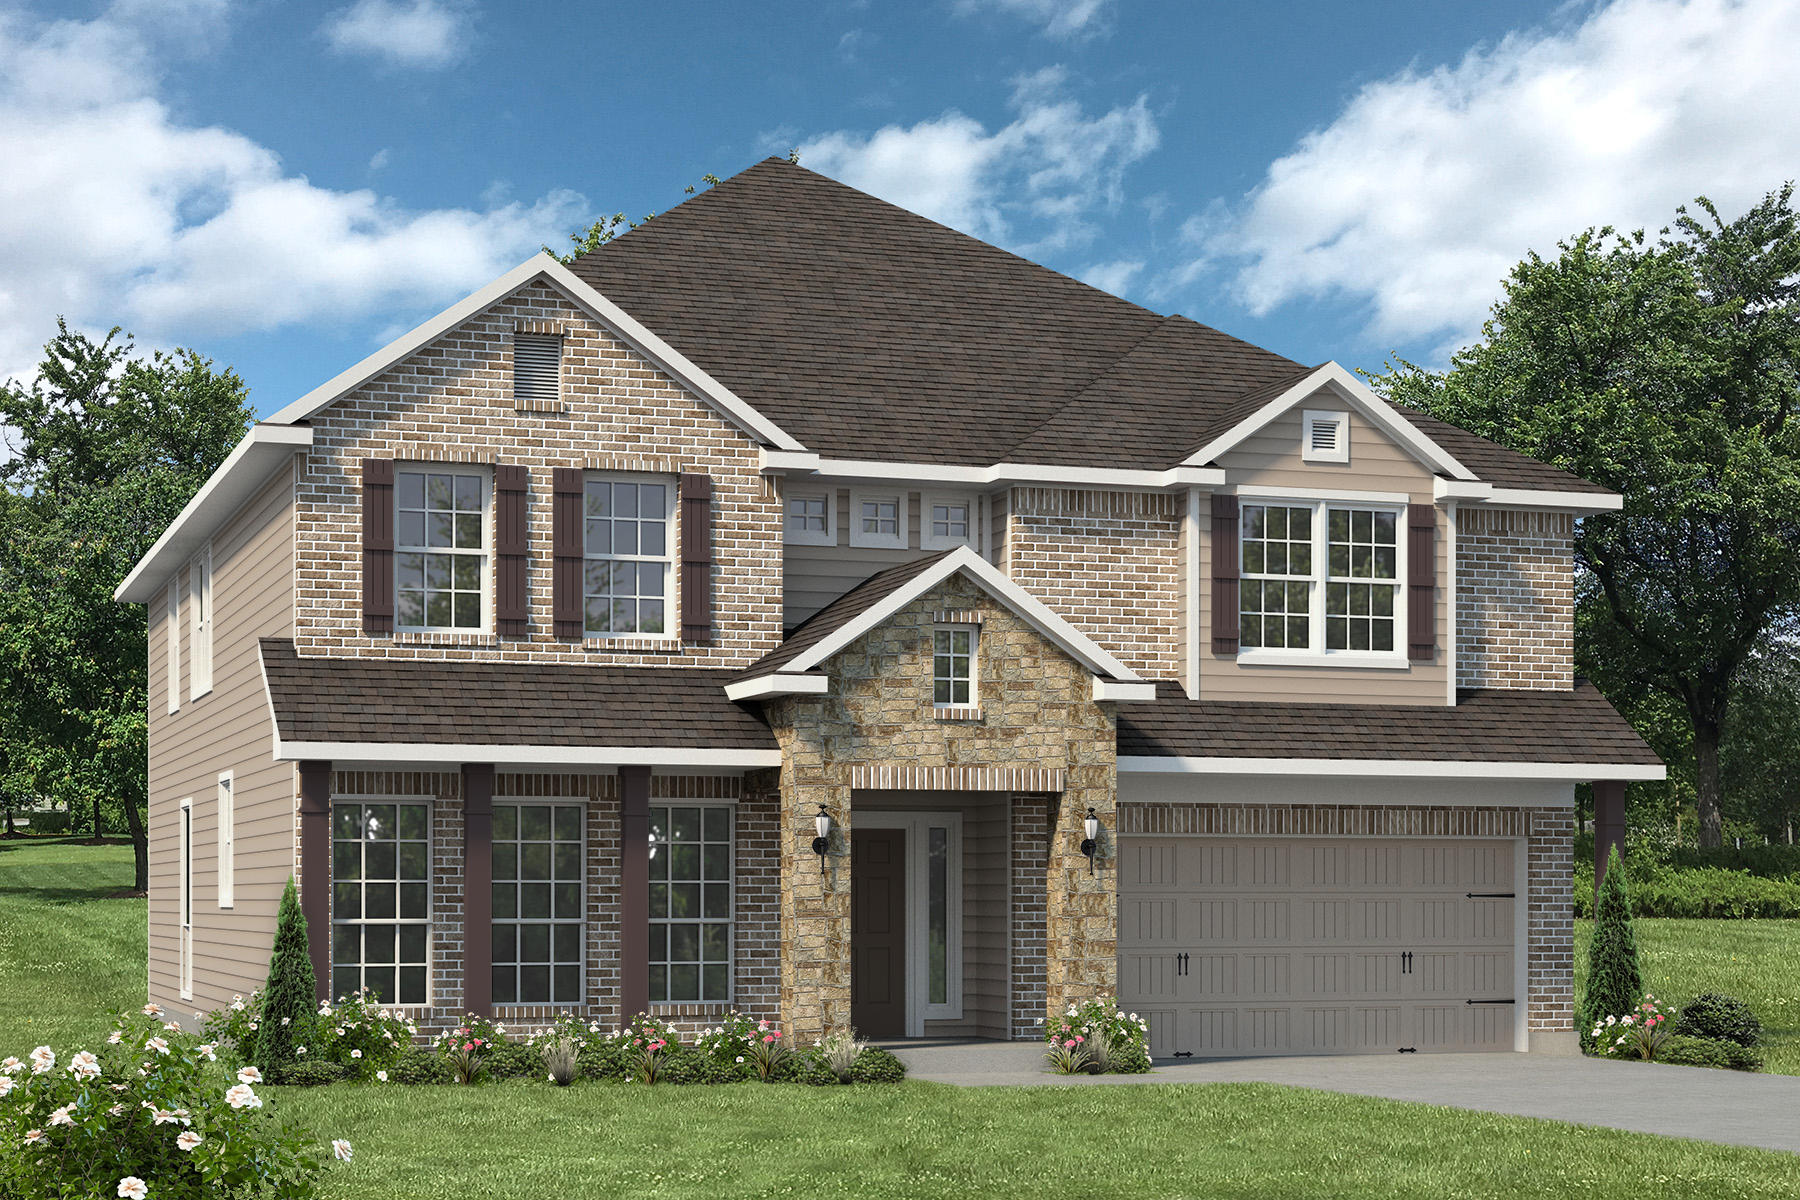 https://myhome.anewgo.com/client/stylecraft/community/Our%20Plans/plan/3268?elevId=49. 3,290sf New Home in Killeen, TX